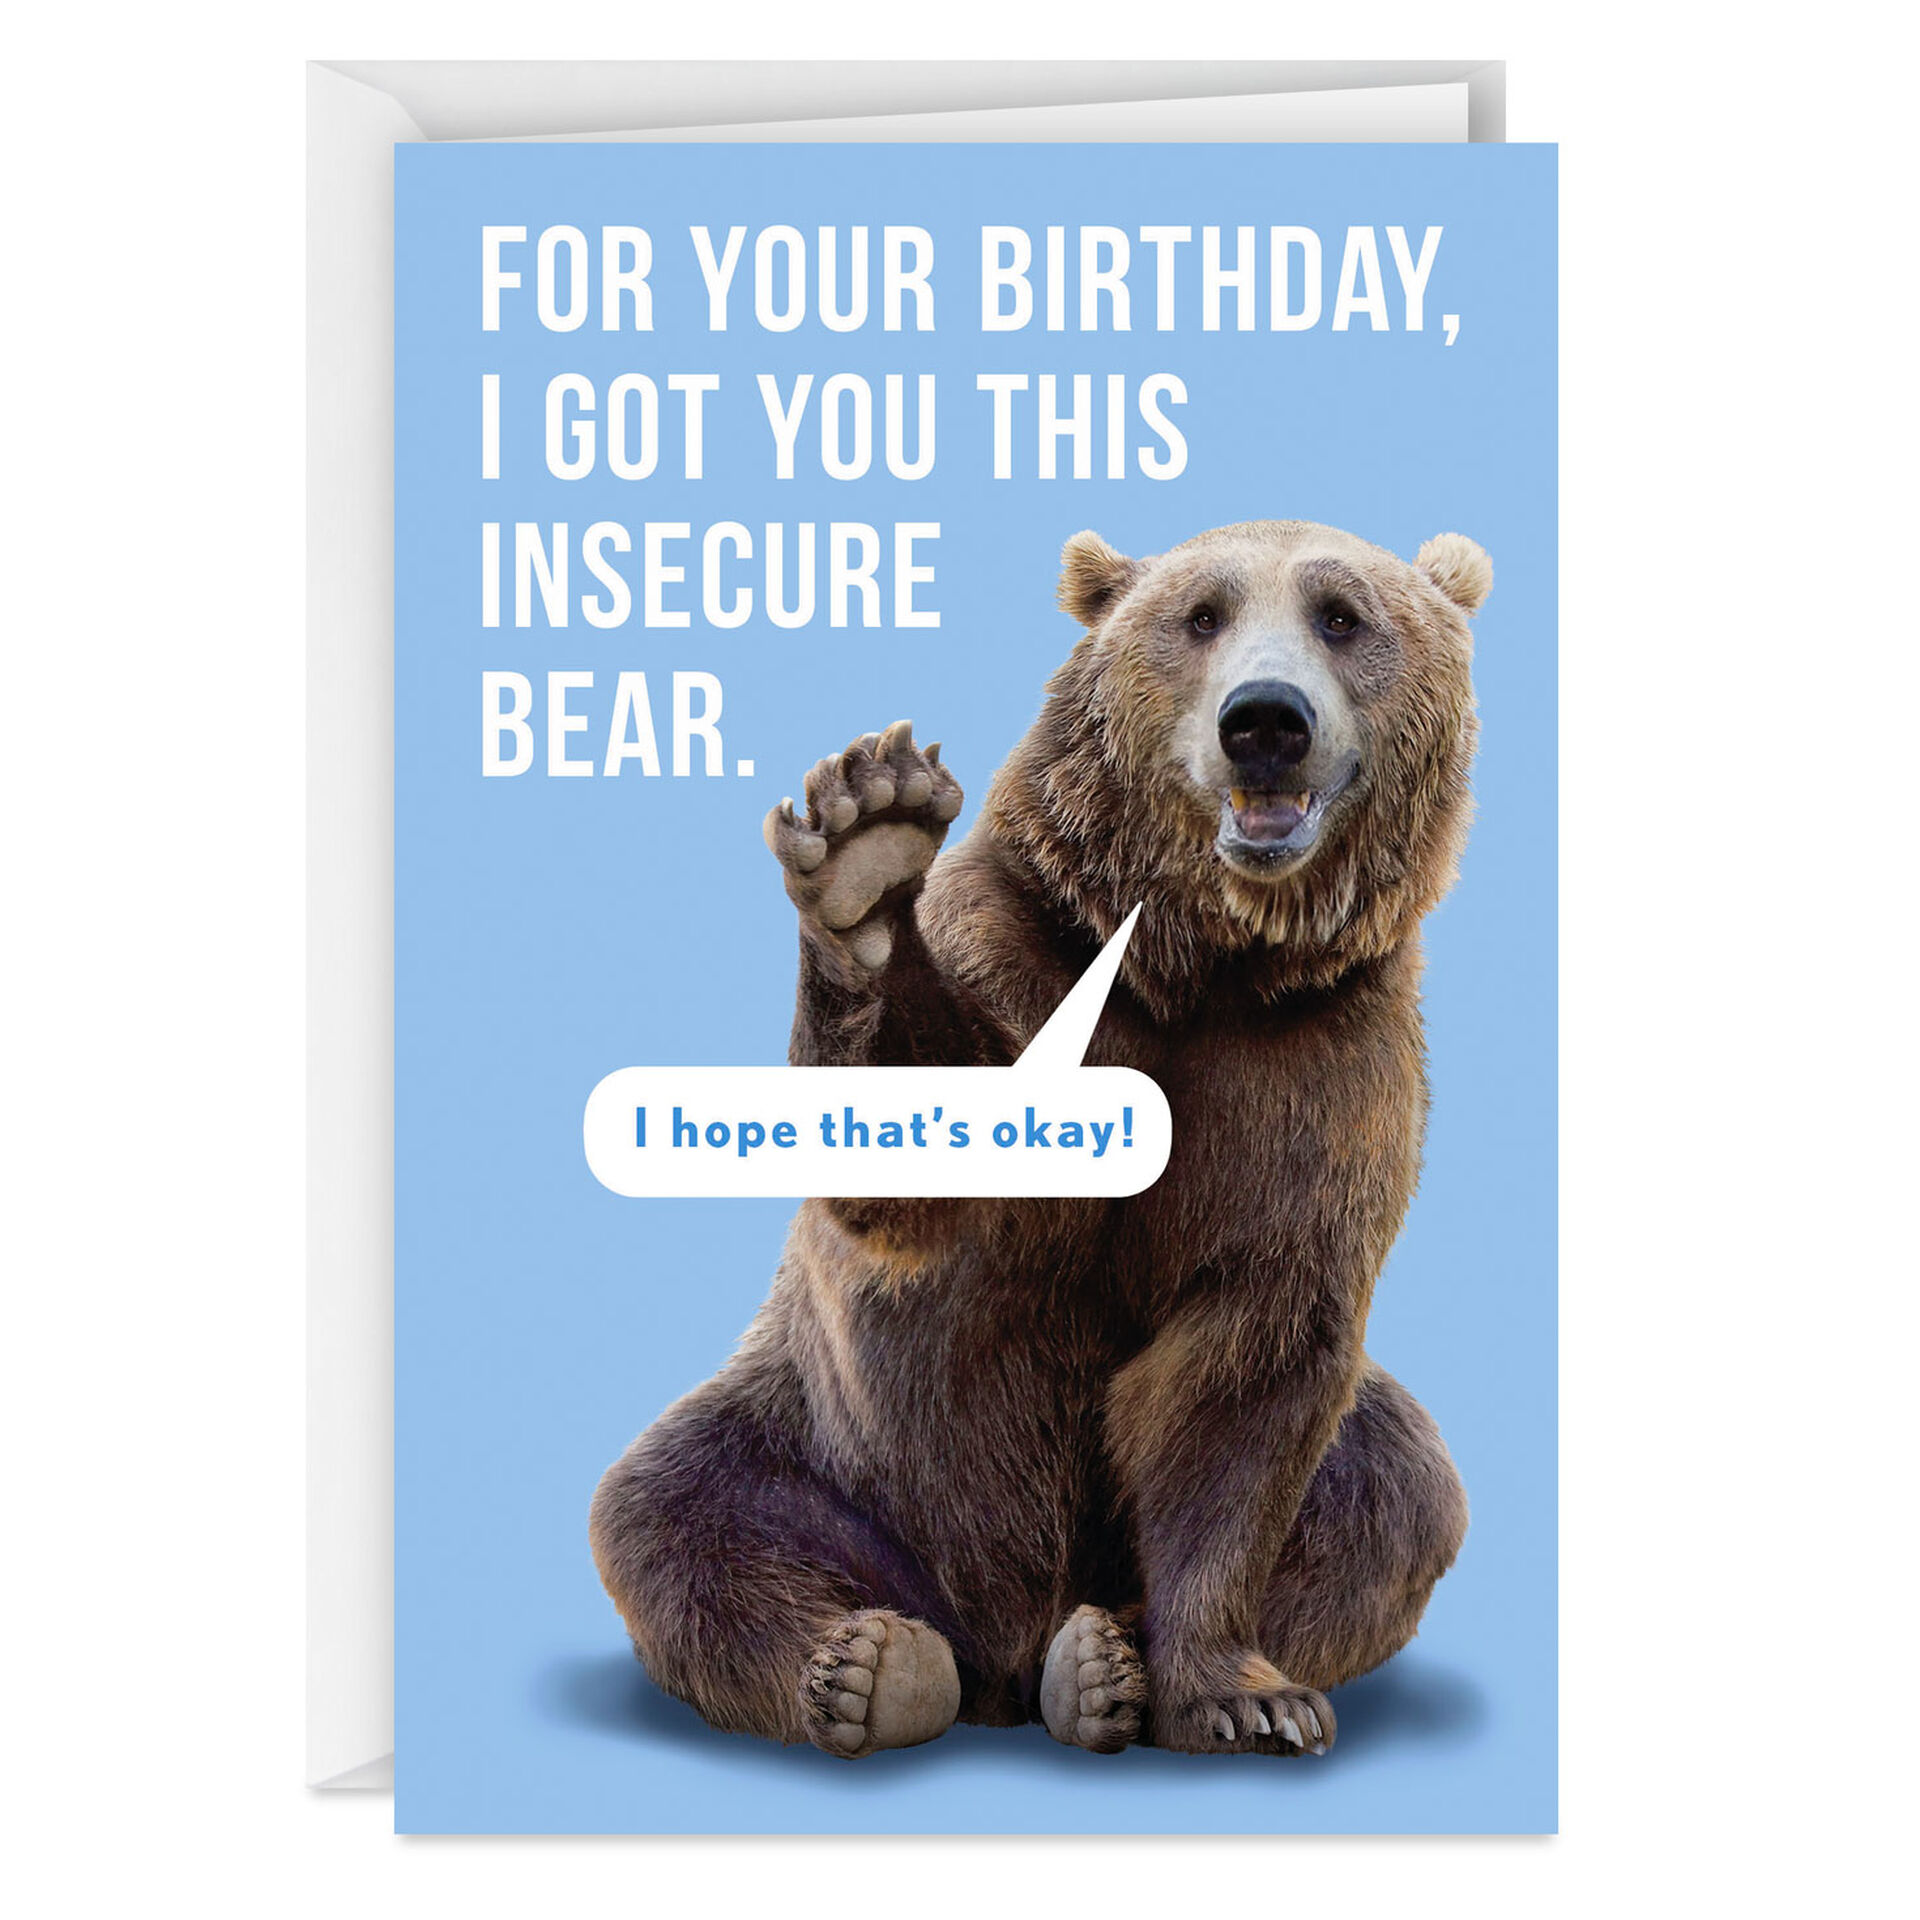 Insecure-Bear-Funny-Birthday-Card_369ZZB4066_01